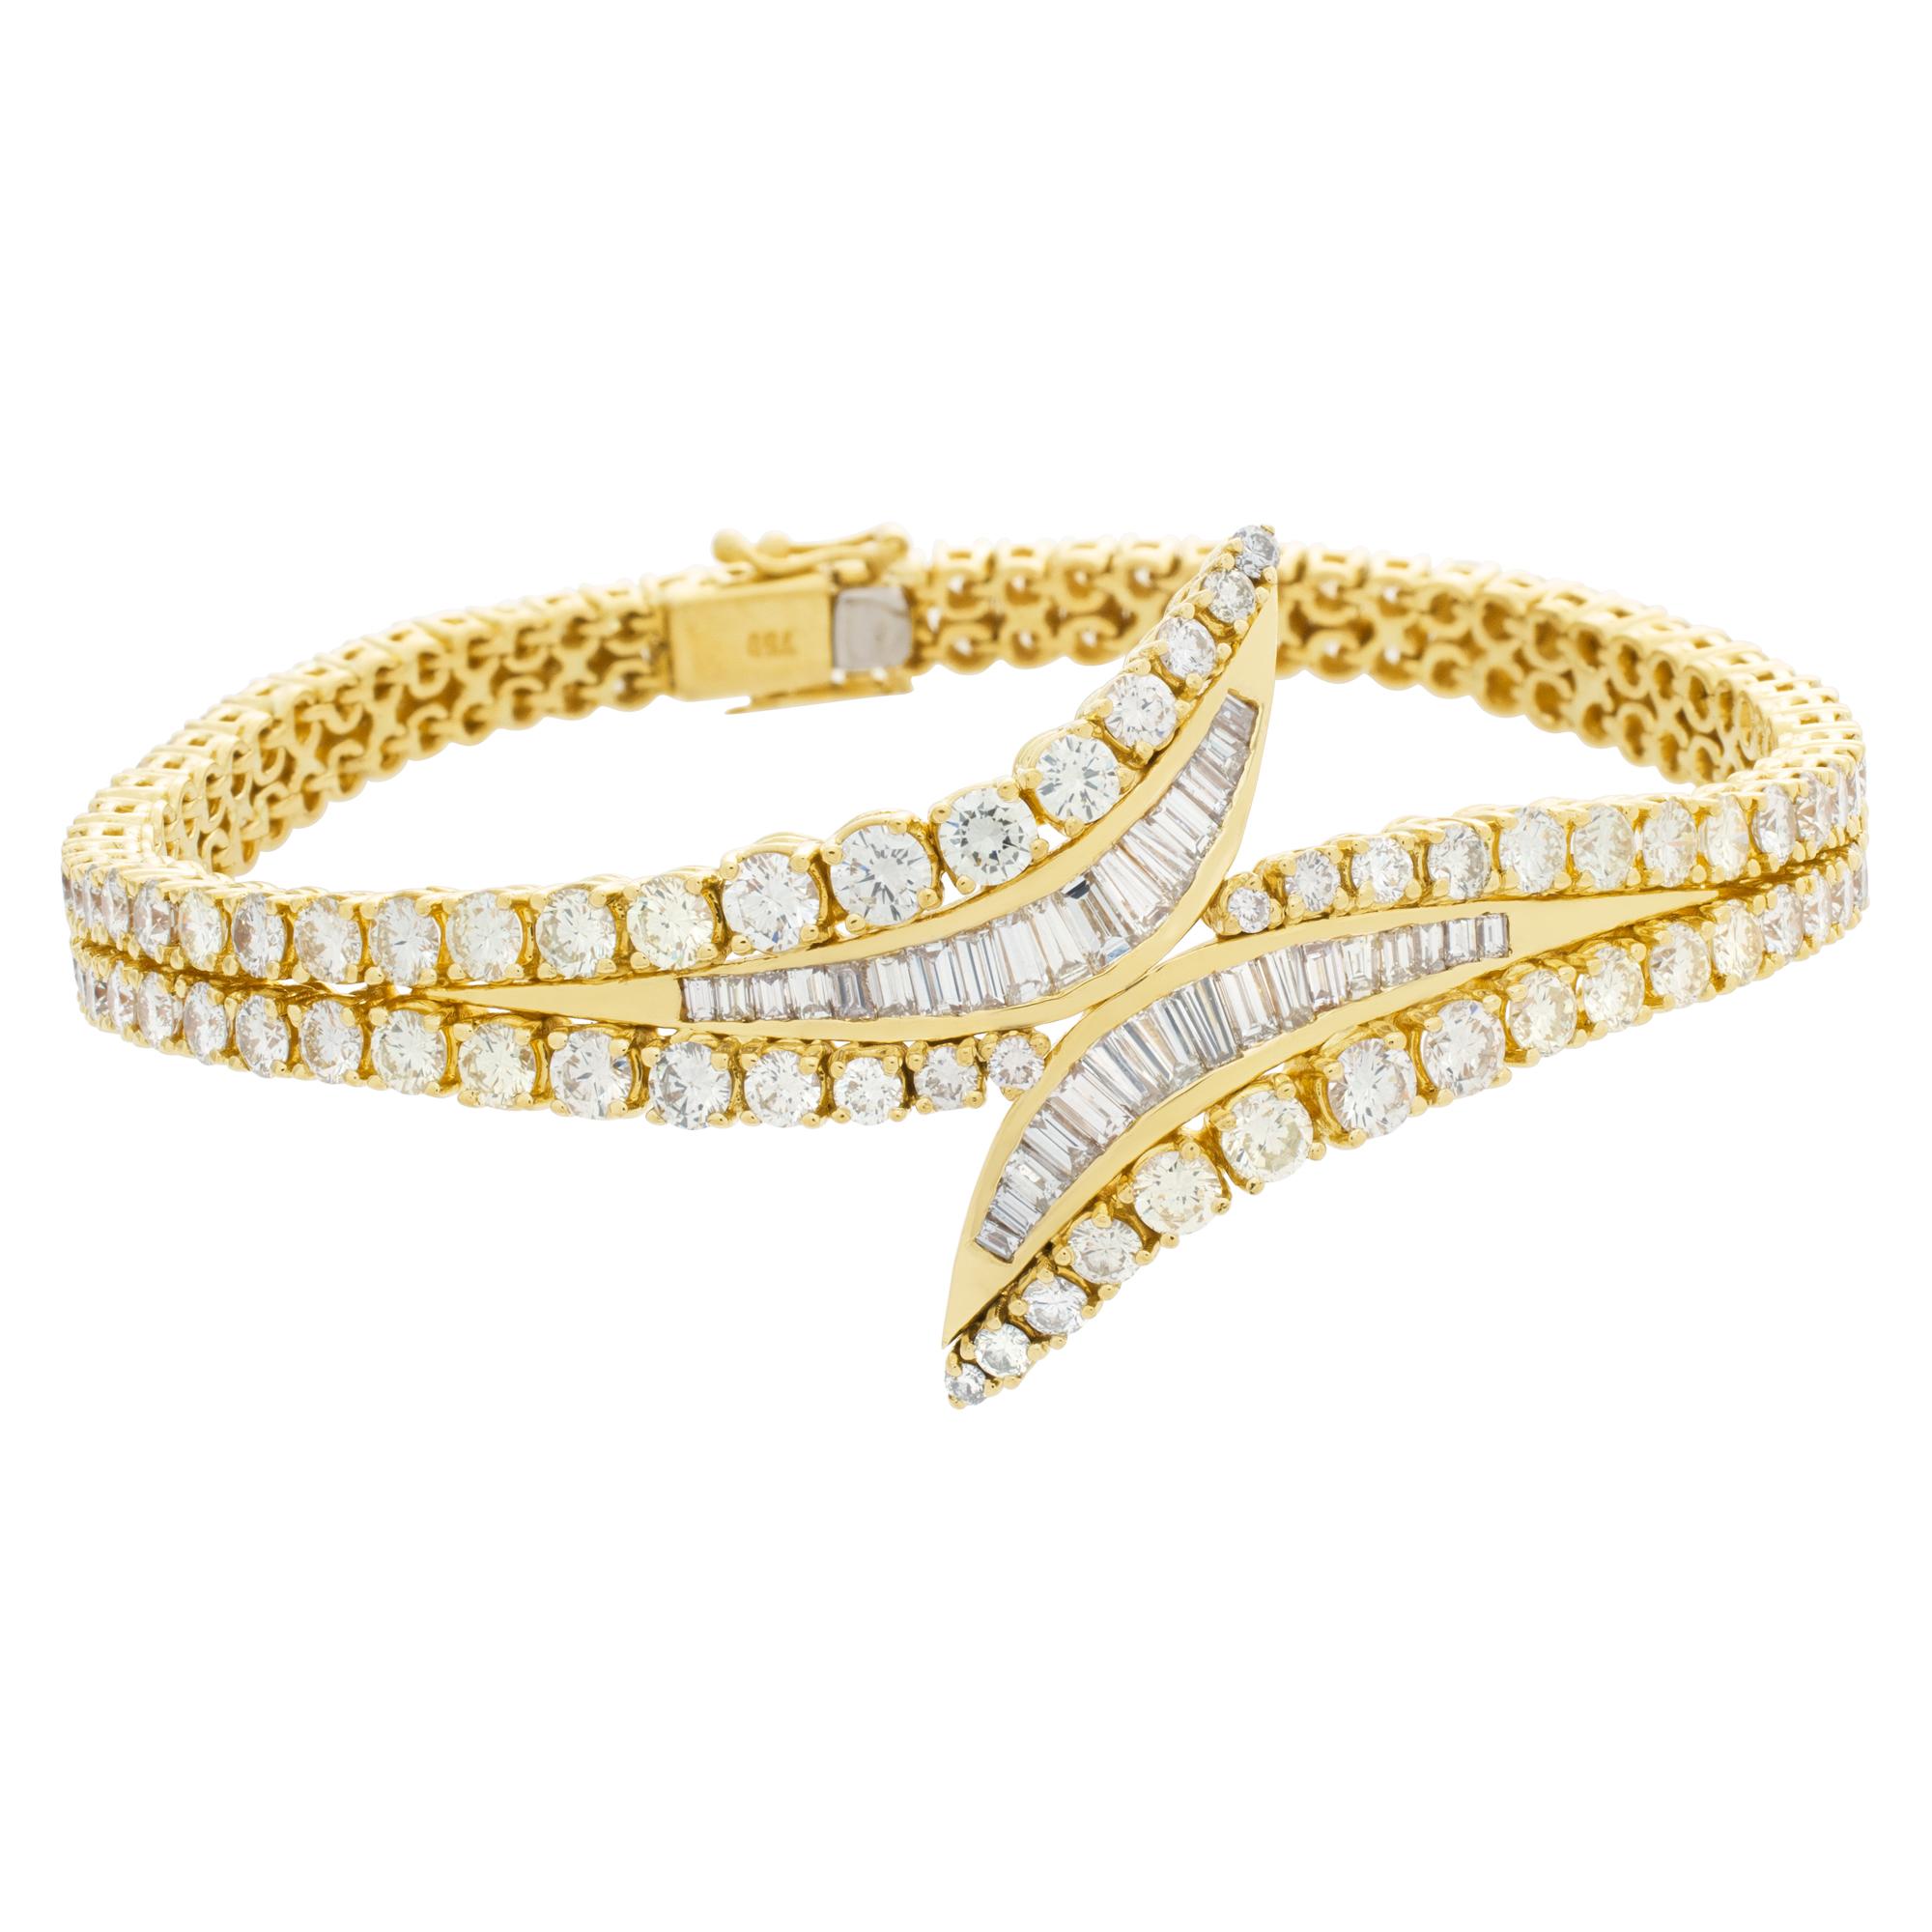 Bracelet in 18k Yellow Gold with over 9 Carats in Round Brilliant Cut Diamonds For Sale 1